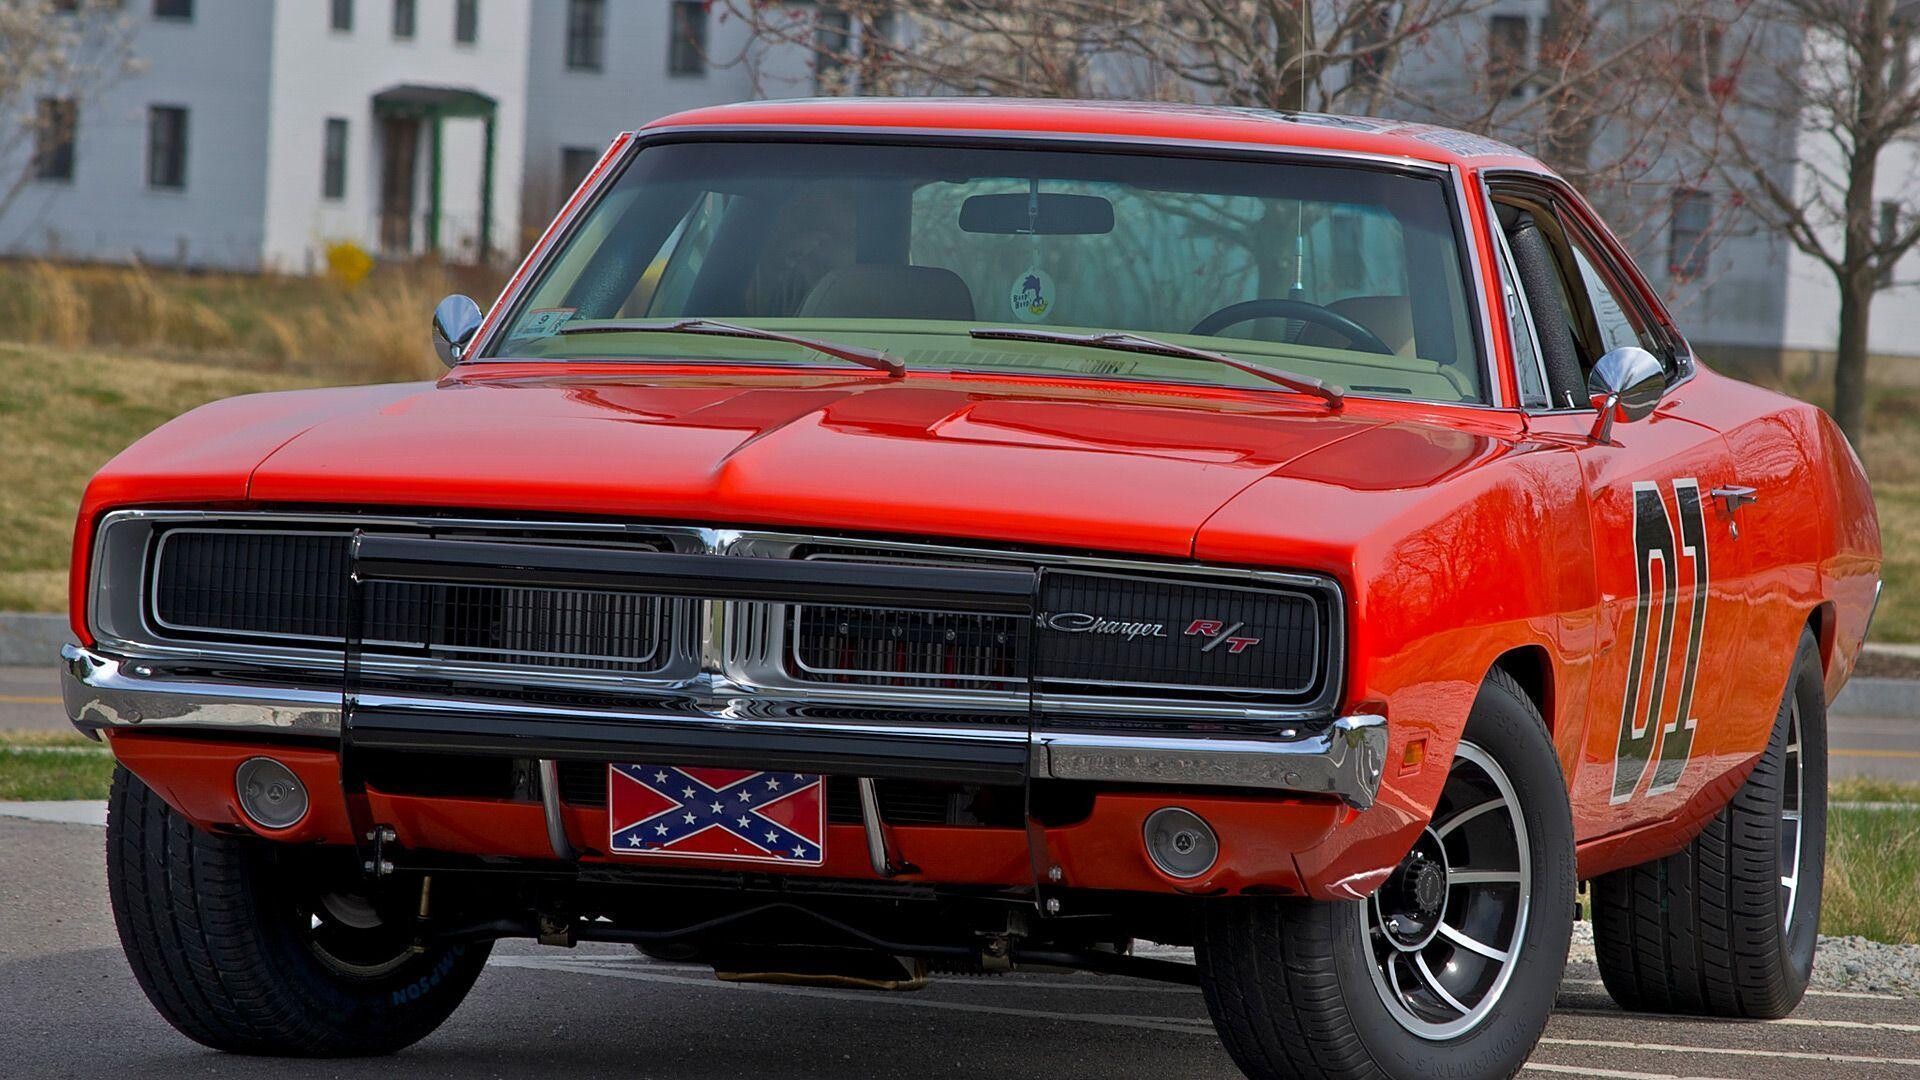 General Lee Car: One of Dodge’s more popular, sporty models – the Charger, The ’69 model, The second generation Charger. 1920x1080 Full HD Wallpaper.